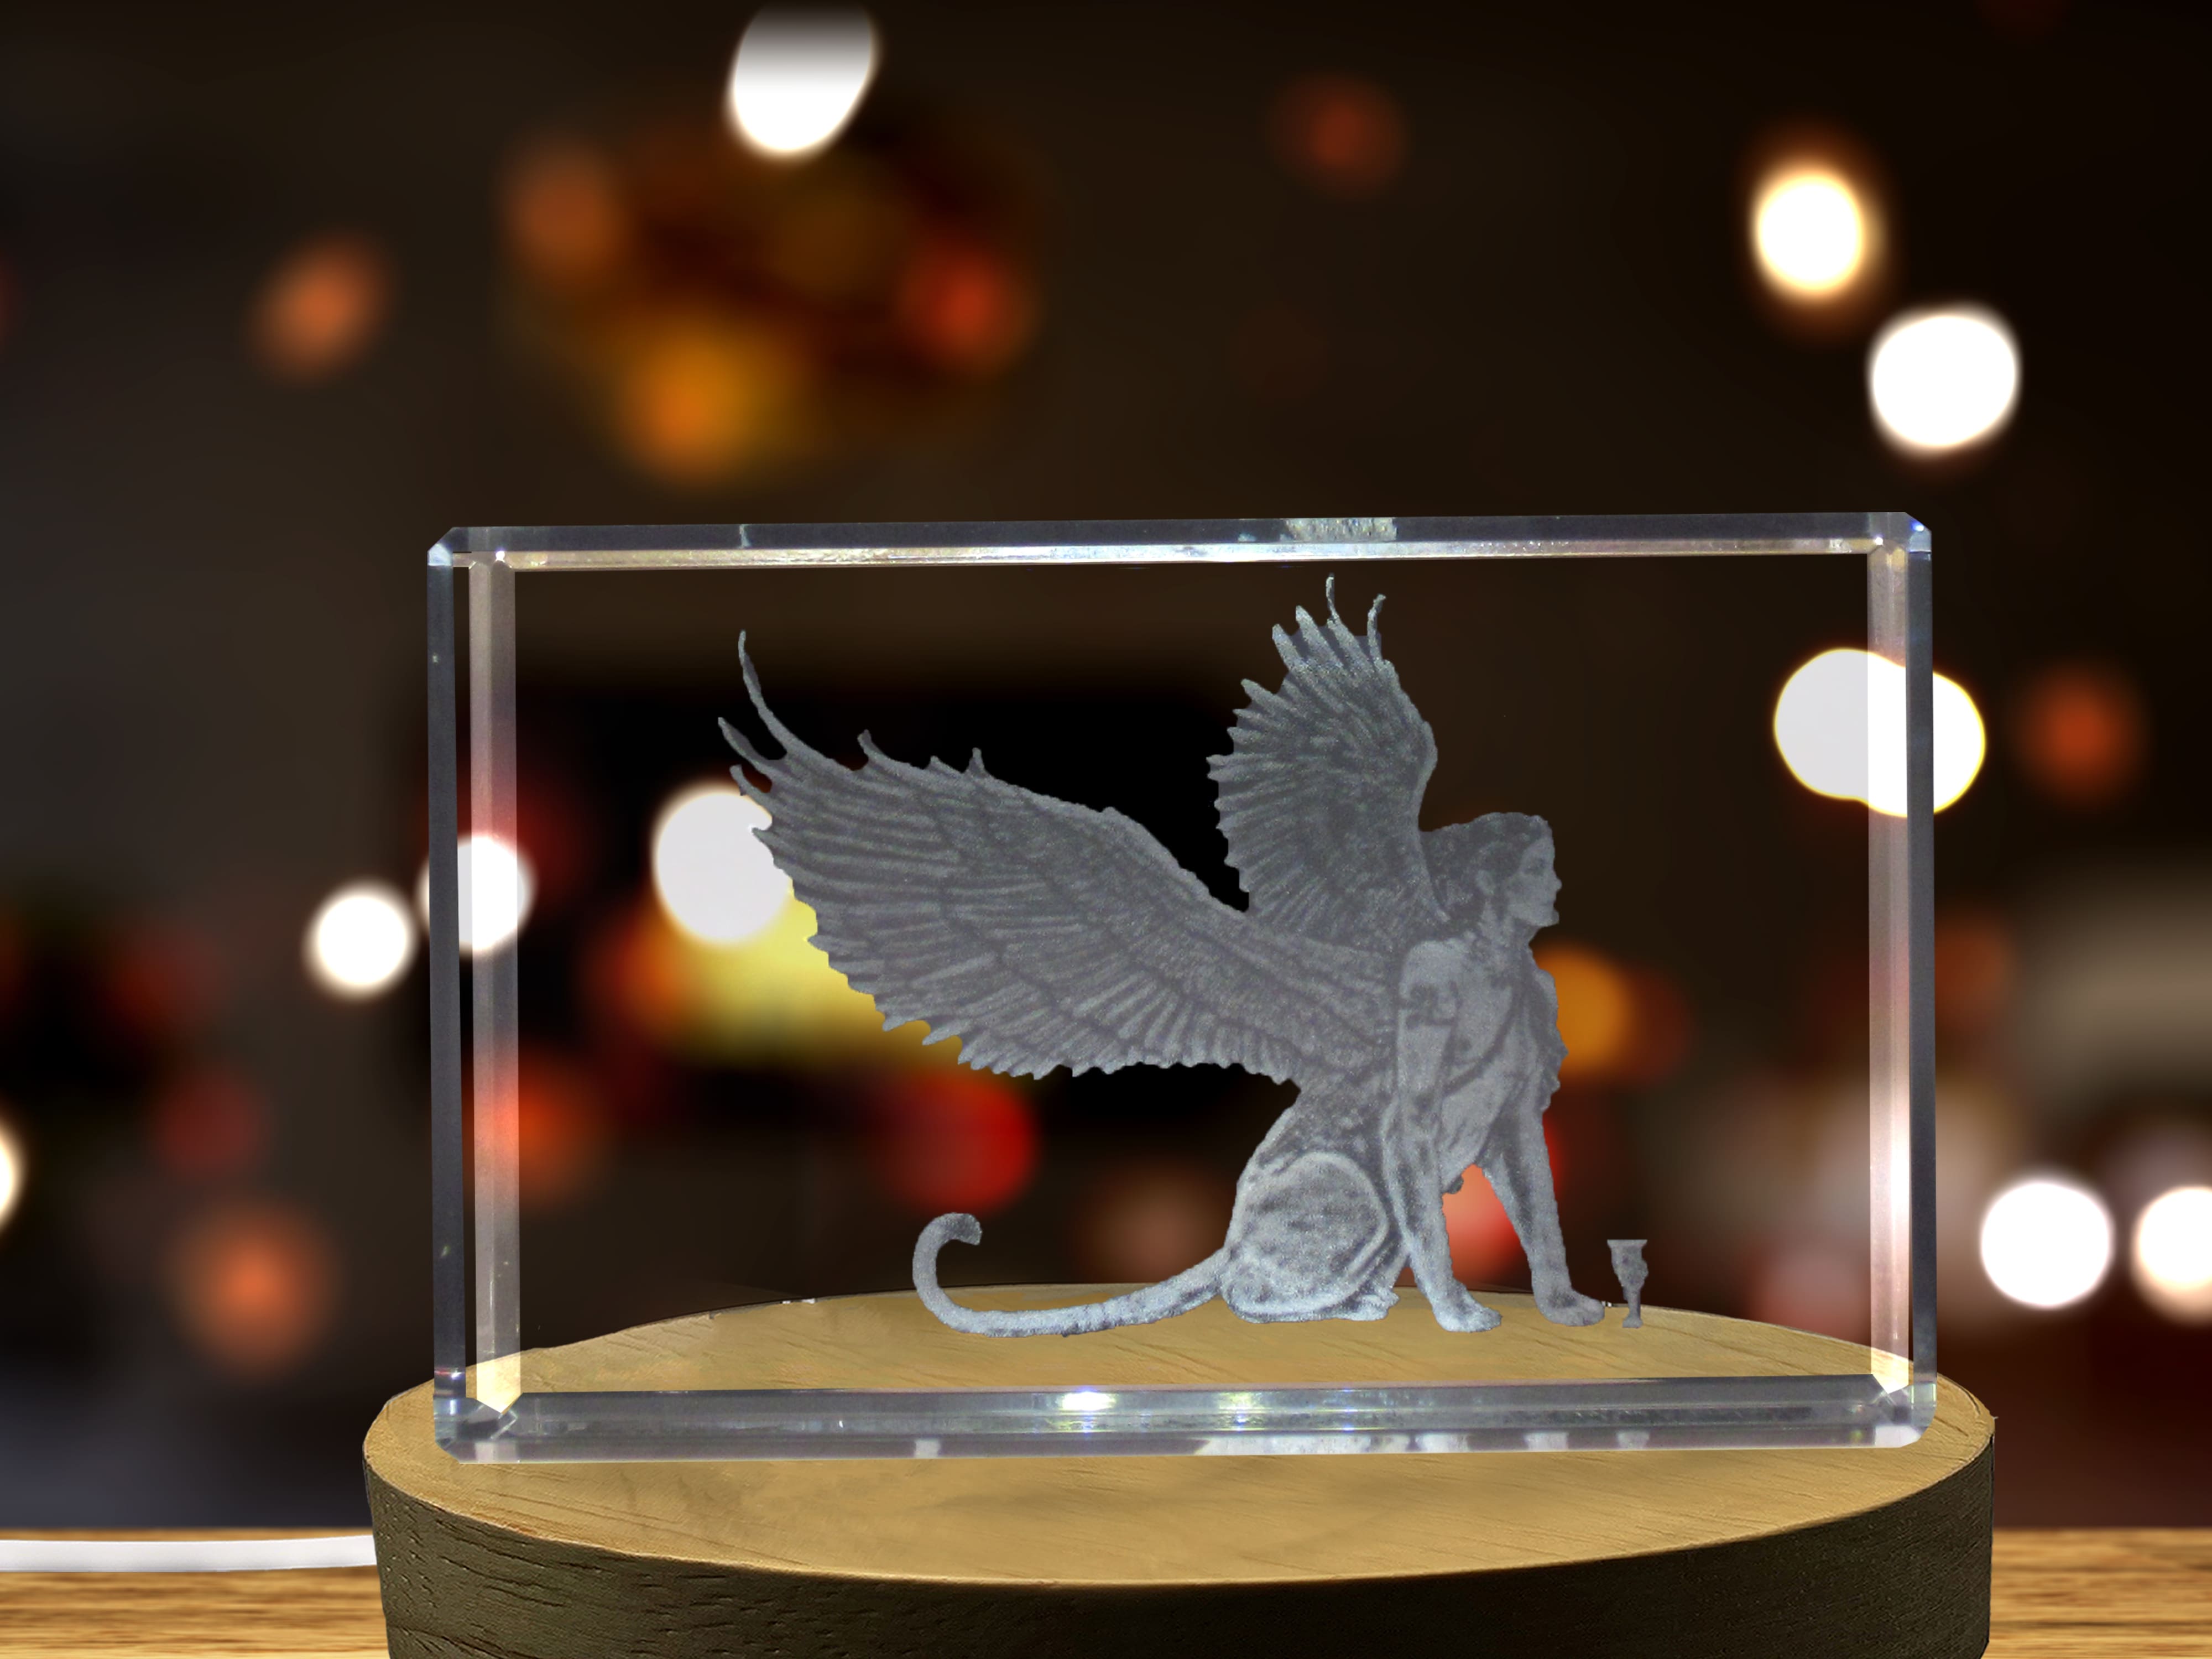 Sphinx 3D Engraved Crystal 3D Engraved Crystal Keepsake/Gift/Decor/Collectible/Souvenir A&B Crystal Collection